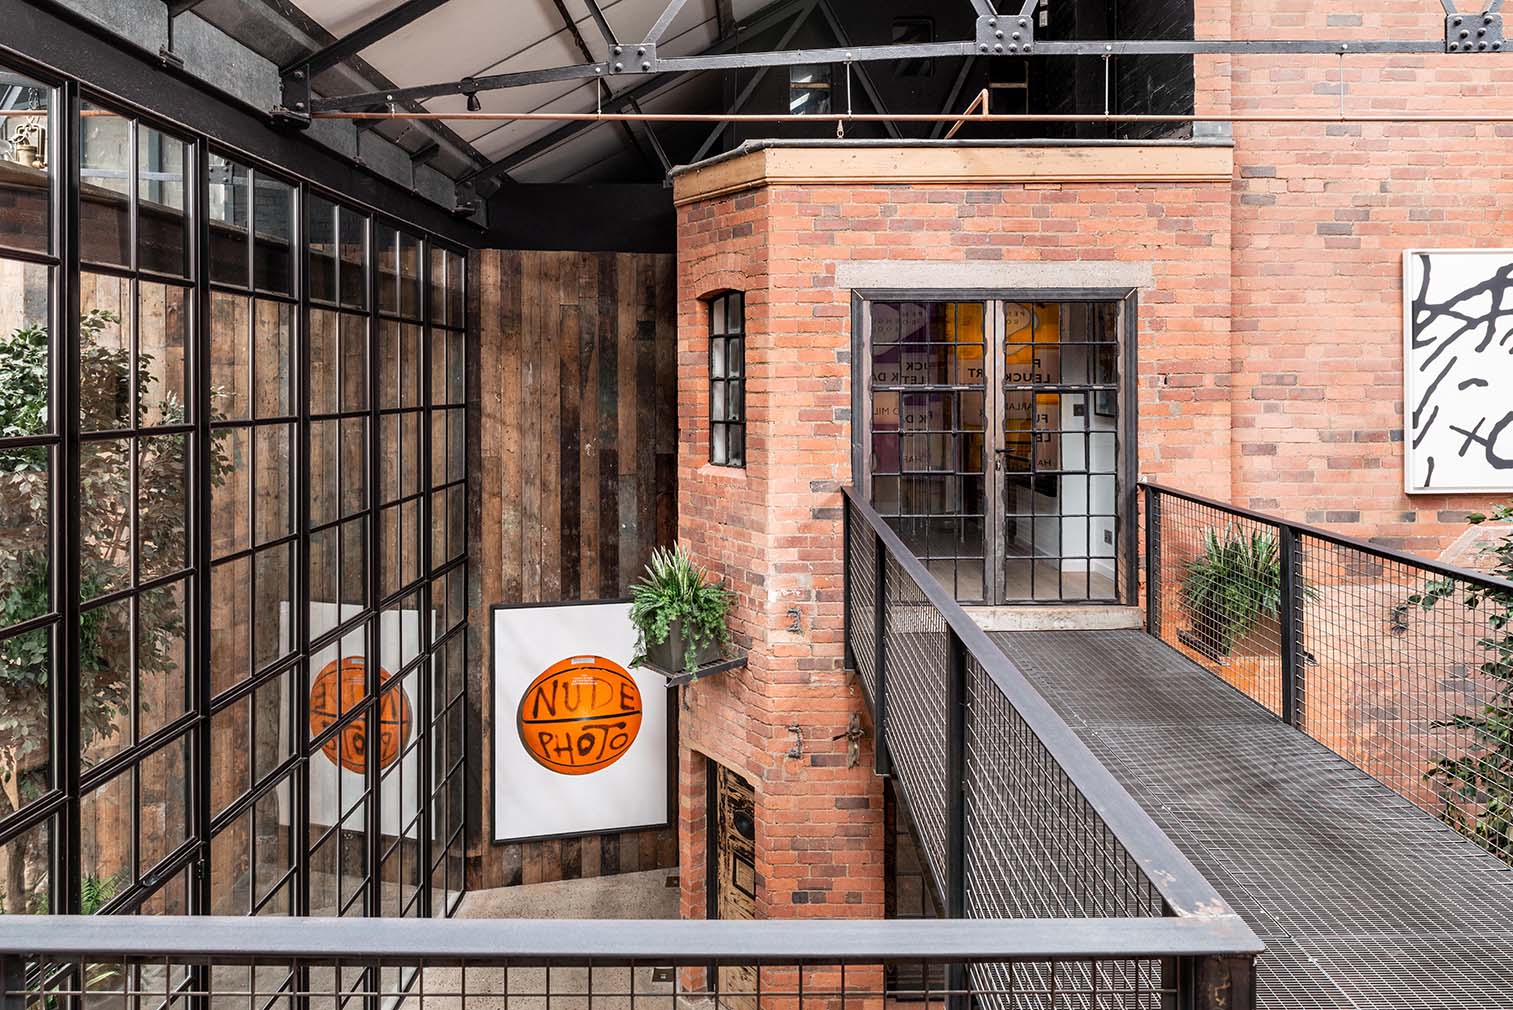 The Compound is an award-winning warehouse conversion in Birmingham’s Jewellery Quarter home to a cinema, office space and set of apartments.